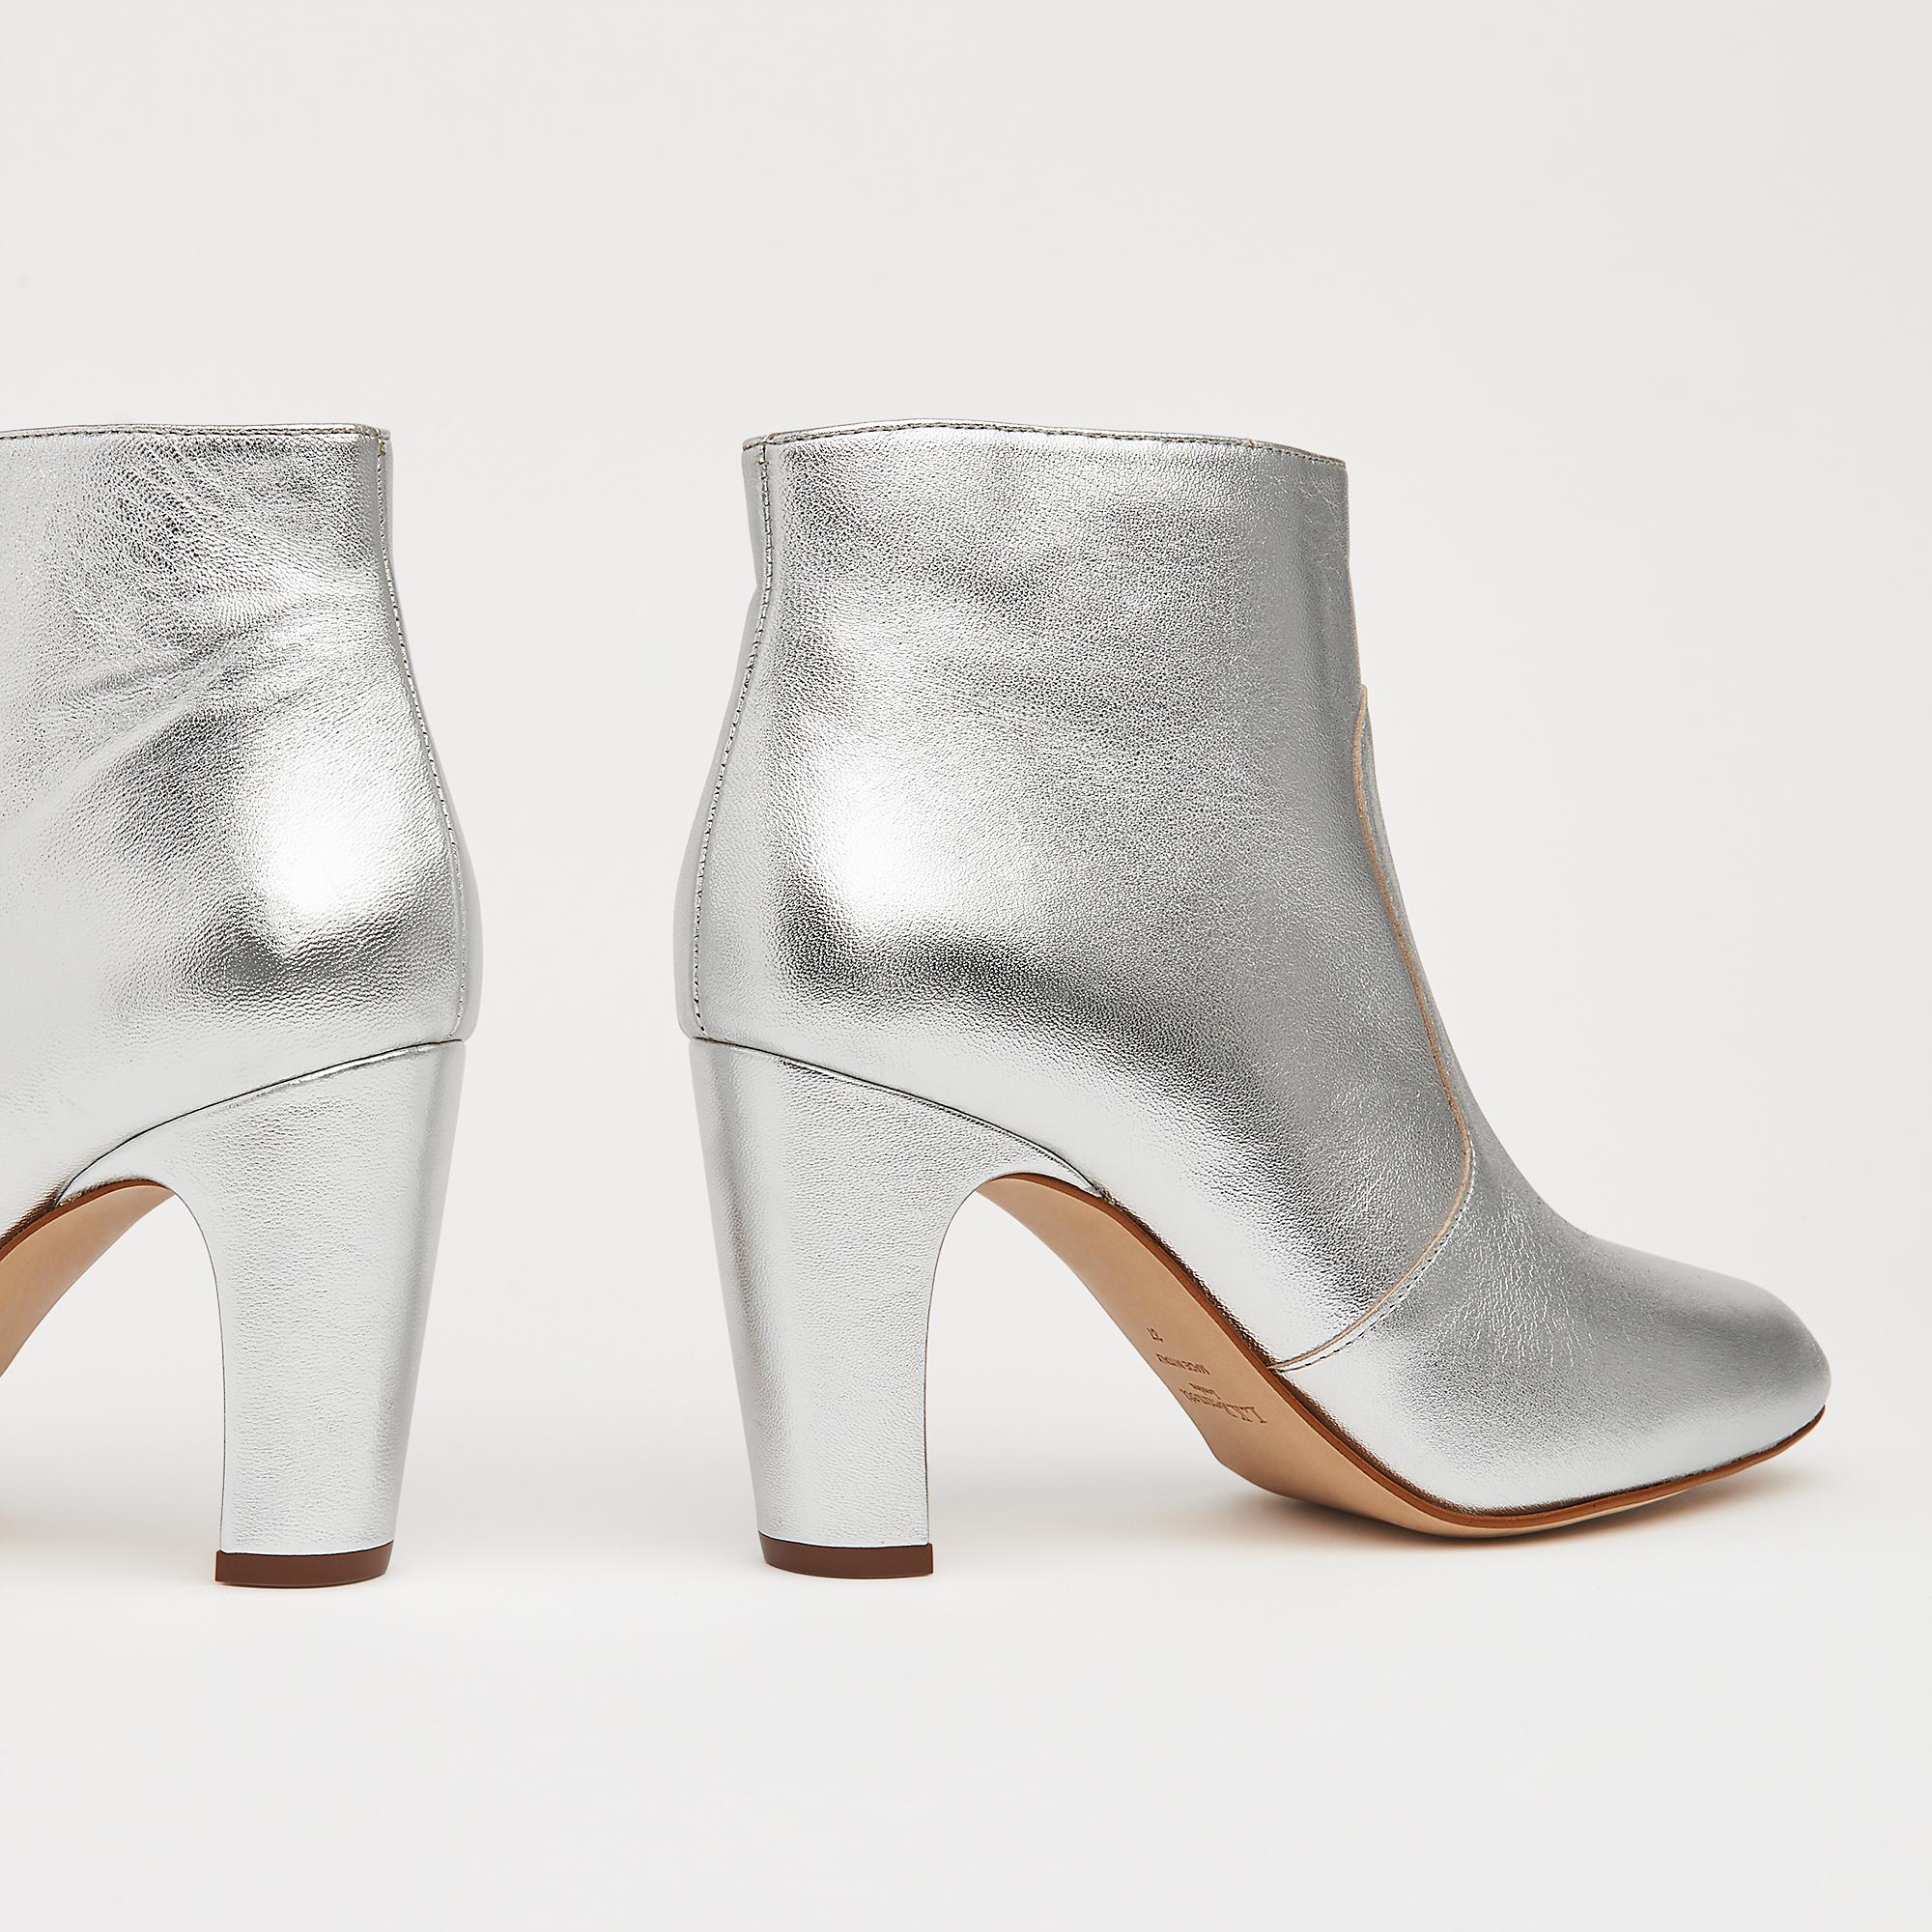 Antonia Silver Metallic Leather Ankle Boots Shoes L K Bennett